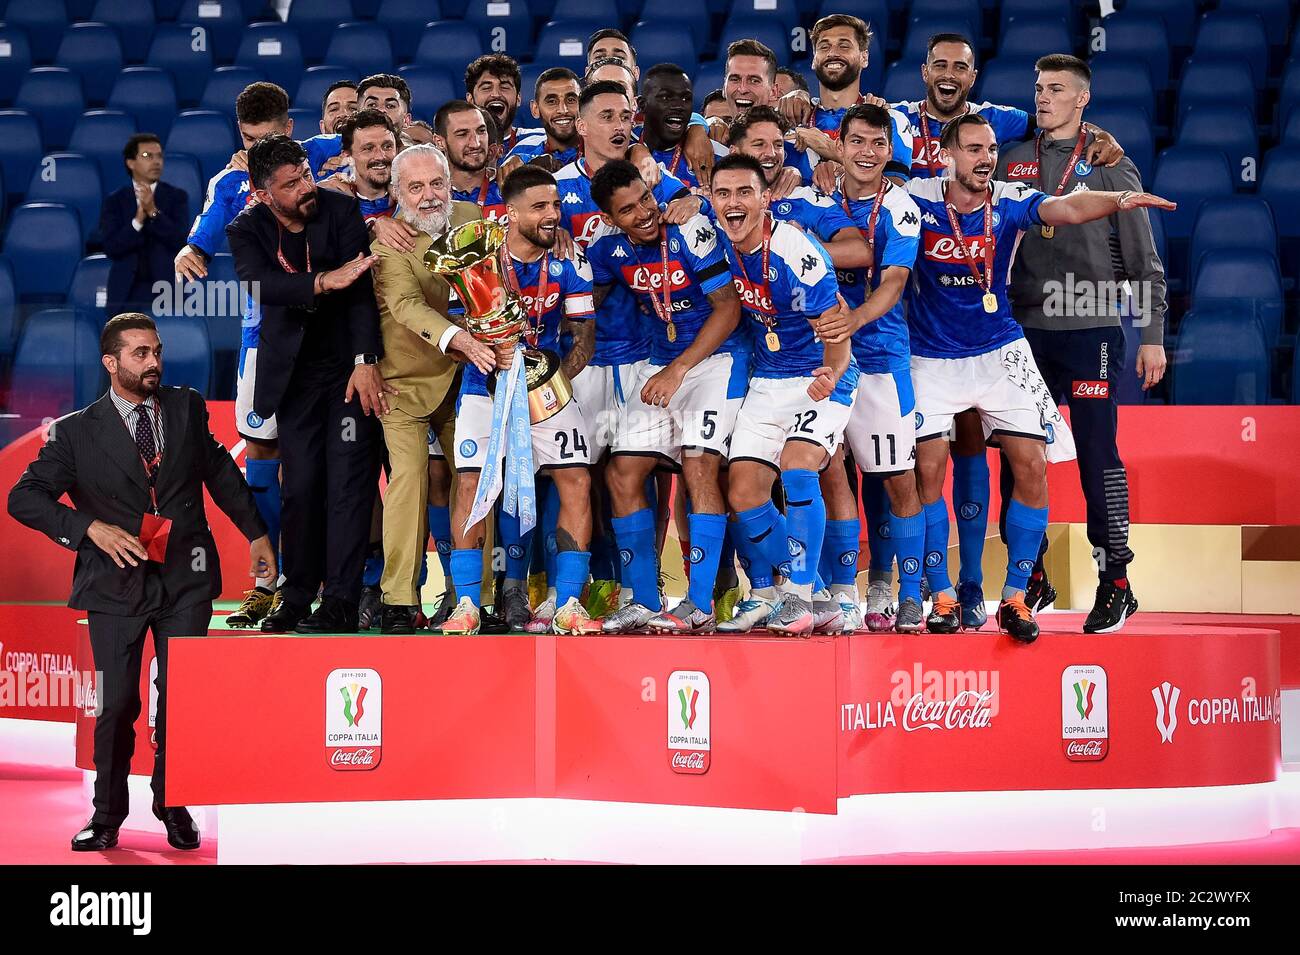 Rome, Italy - 17 June, 2020: Players of SSC Napoli celebrate with the trophy during the awards ceremony at end of the Coppa Italia final football match between SSC Napoli and Juventus FC. SSC Napoli won 4-2 over Juventus FC after penalty kicks, regular time ended 0-0. Credit: Nicolò Campo/Alamy Live News Stock Photo